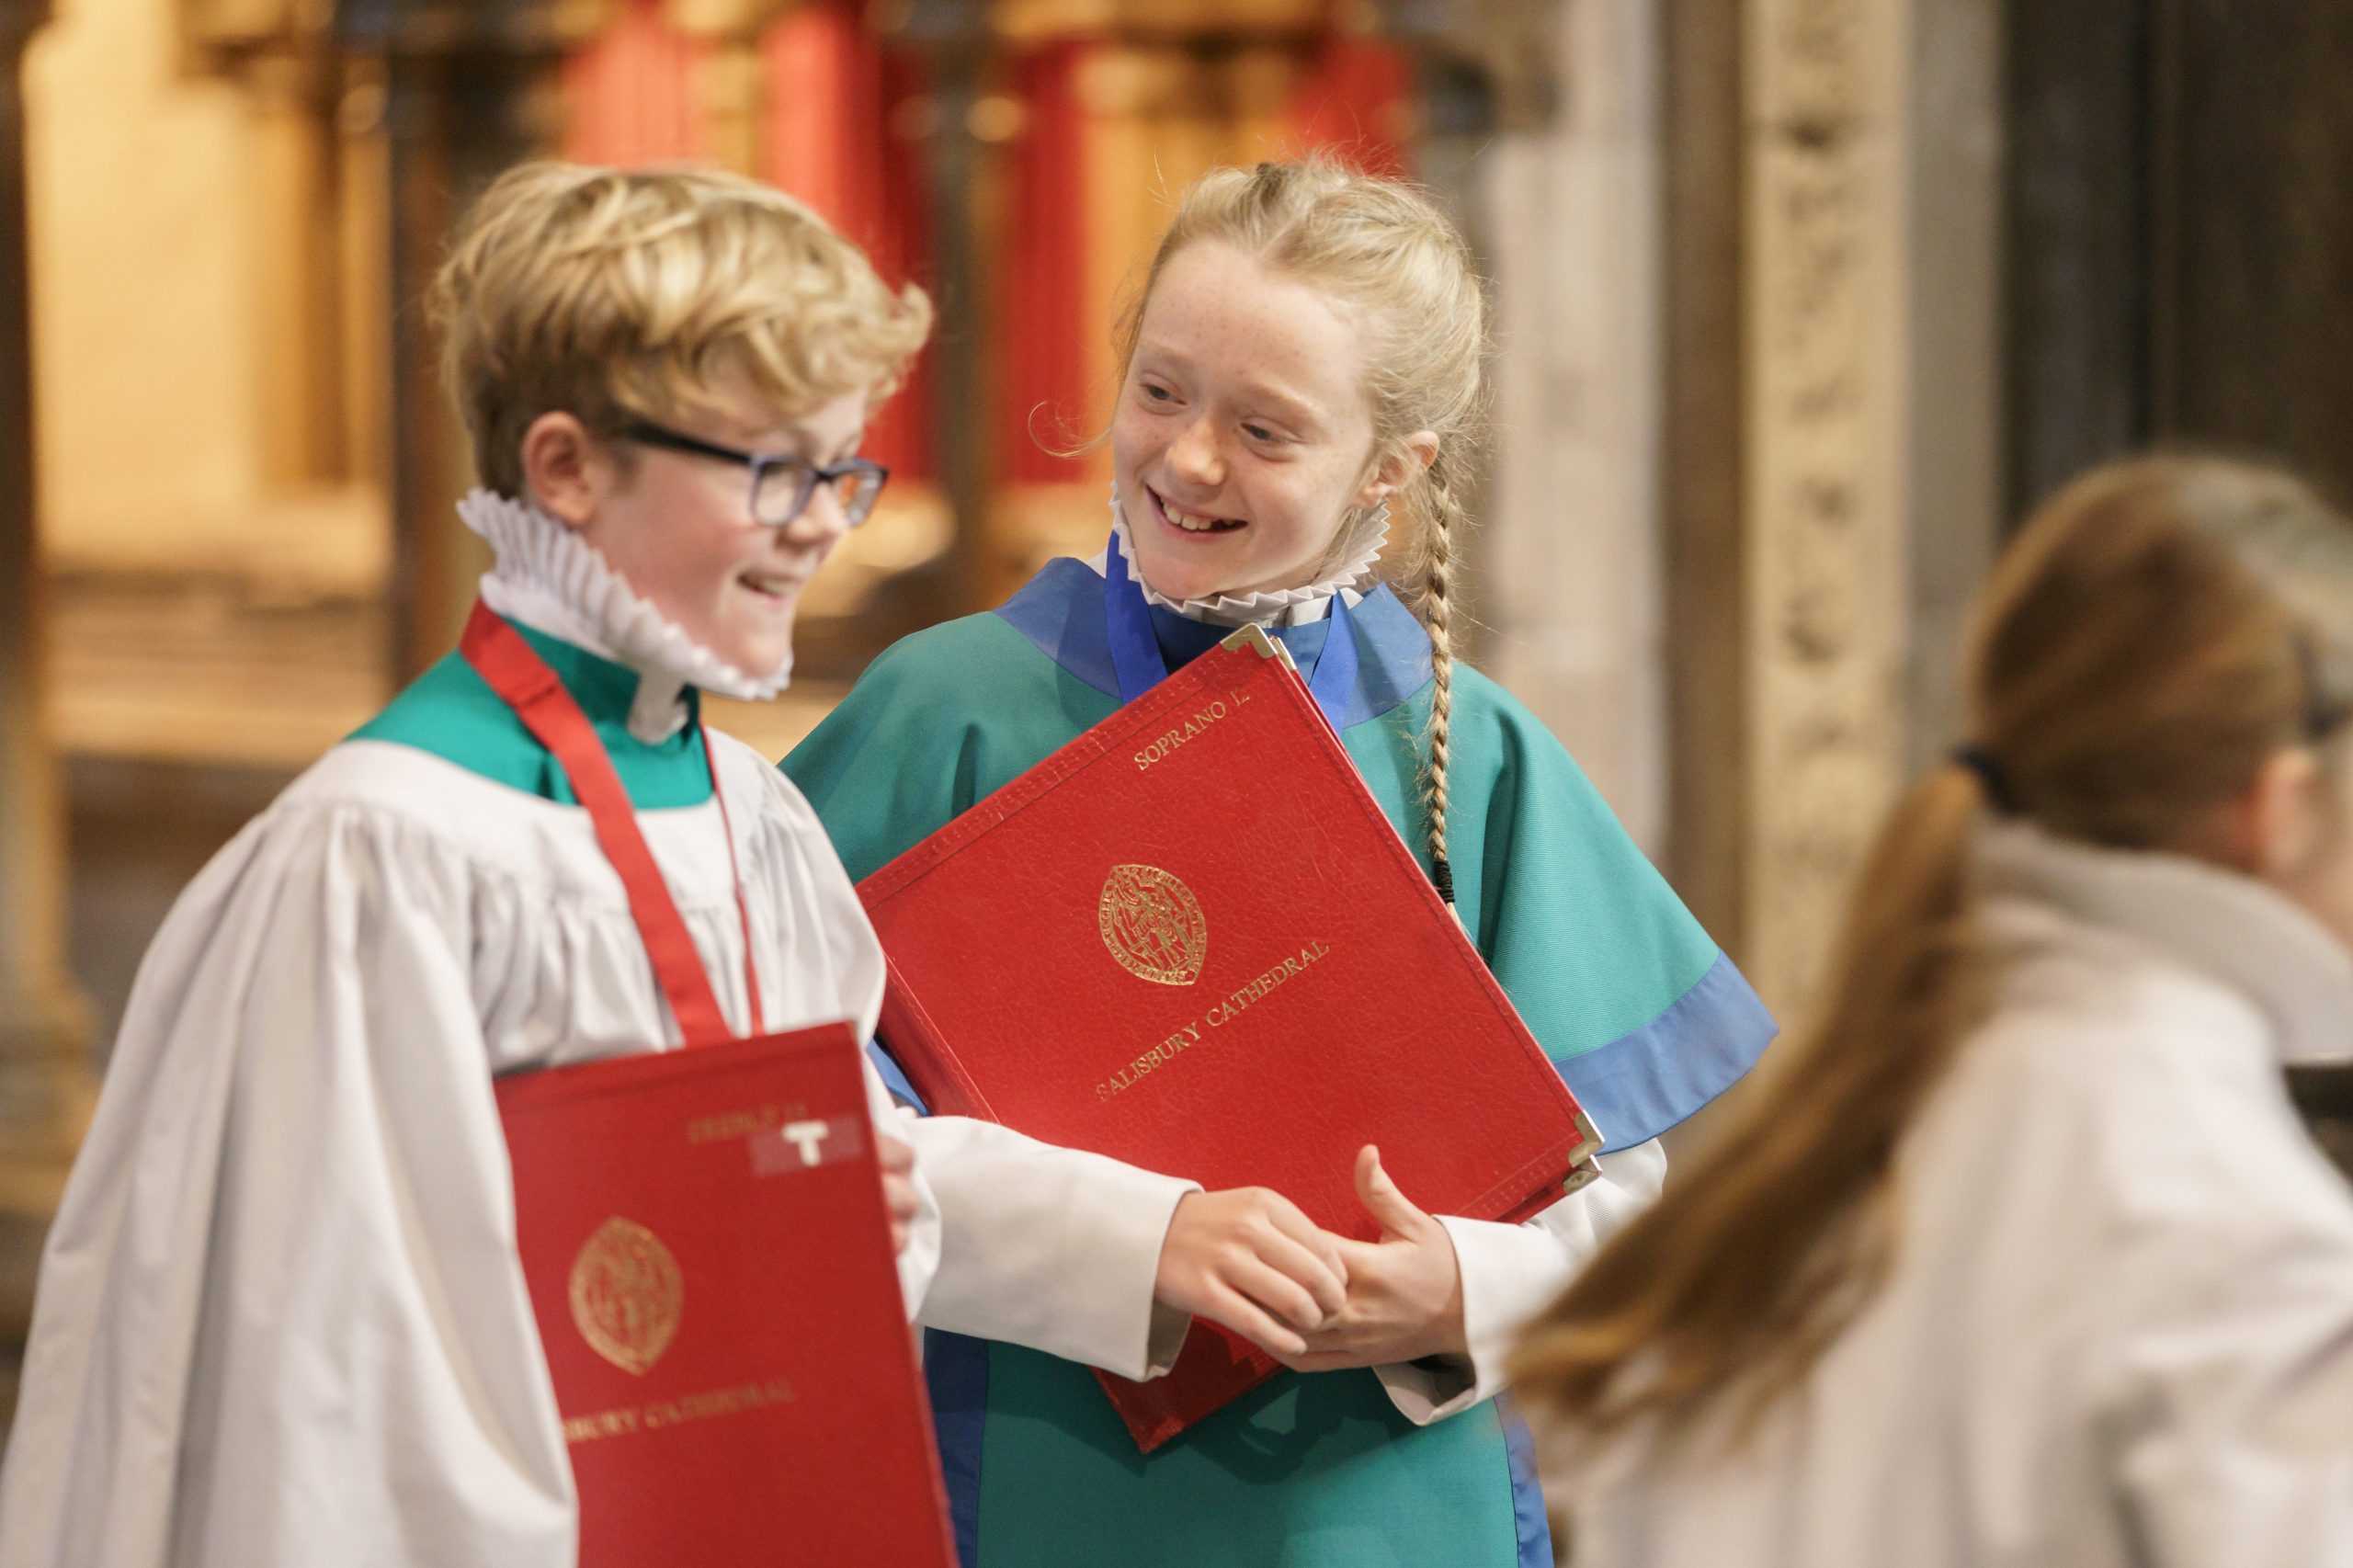 Voice Trials for Cathedral choristers – recruitment goes ahead despite pandemic disruption